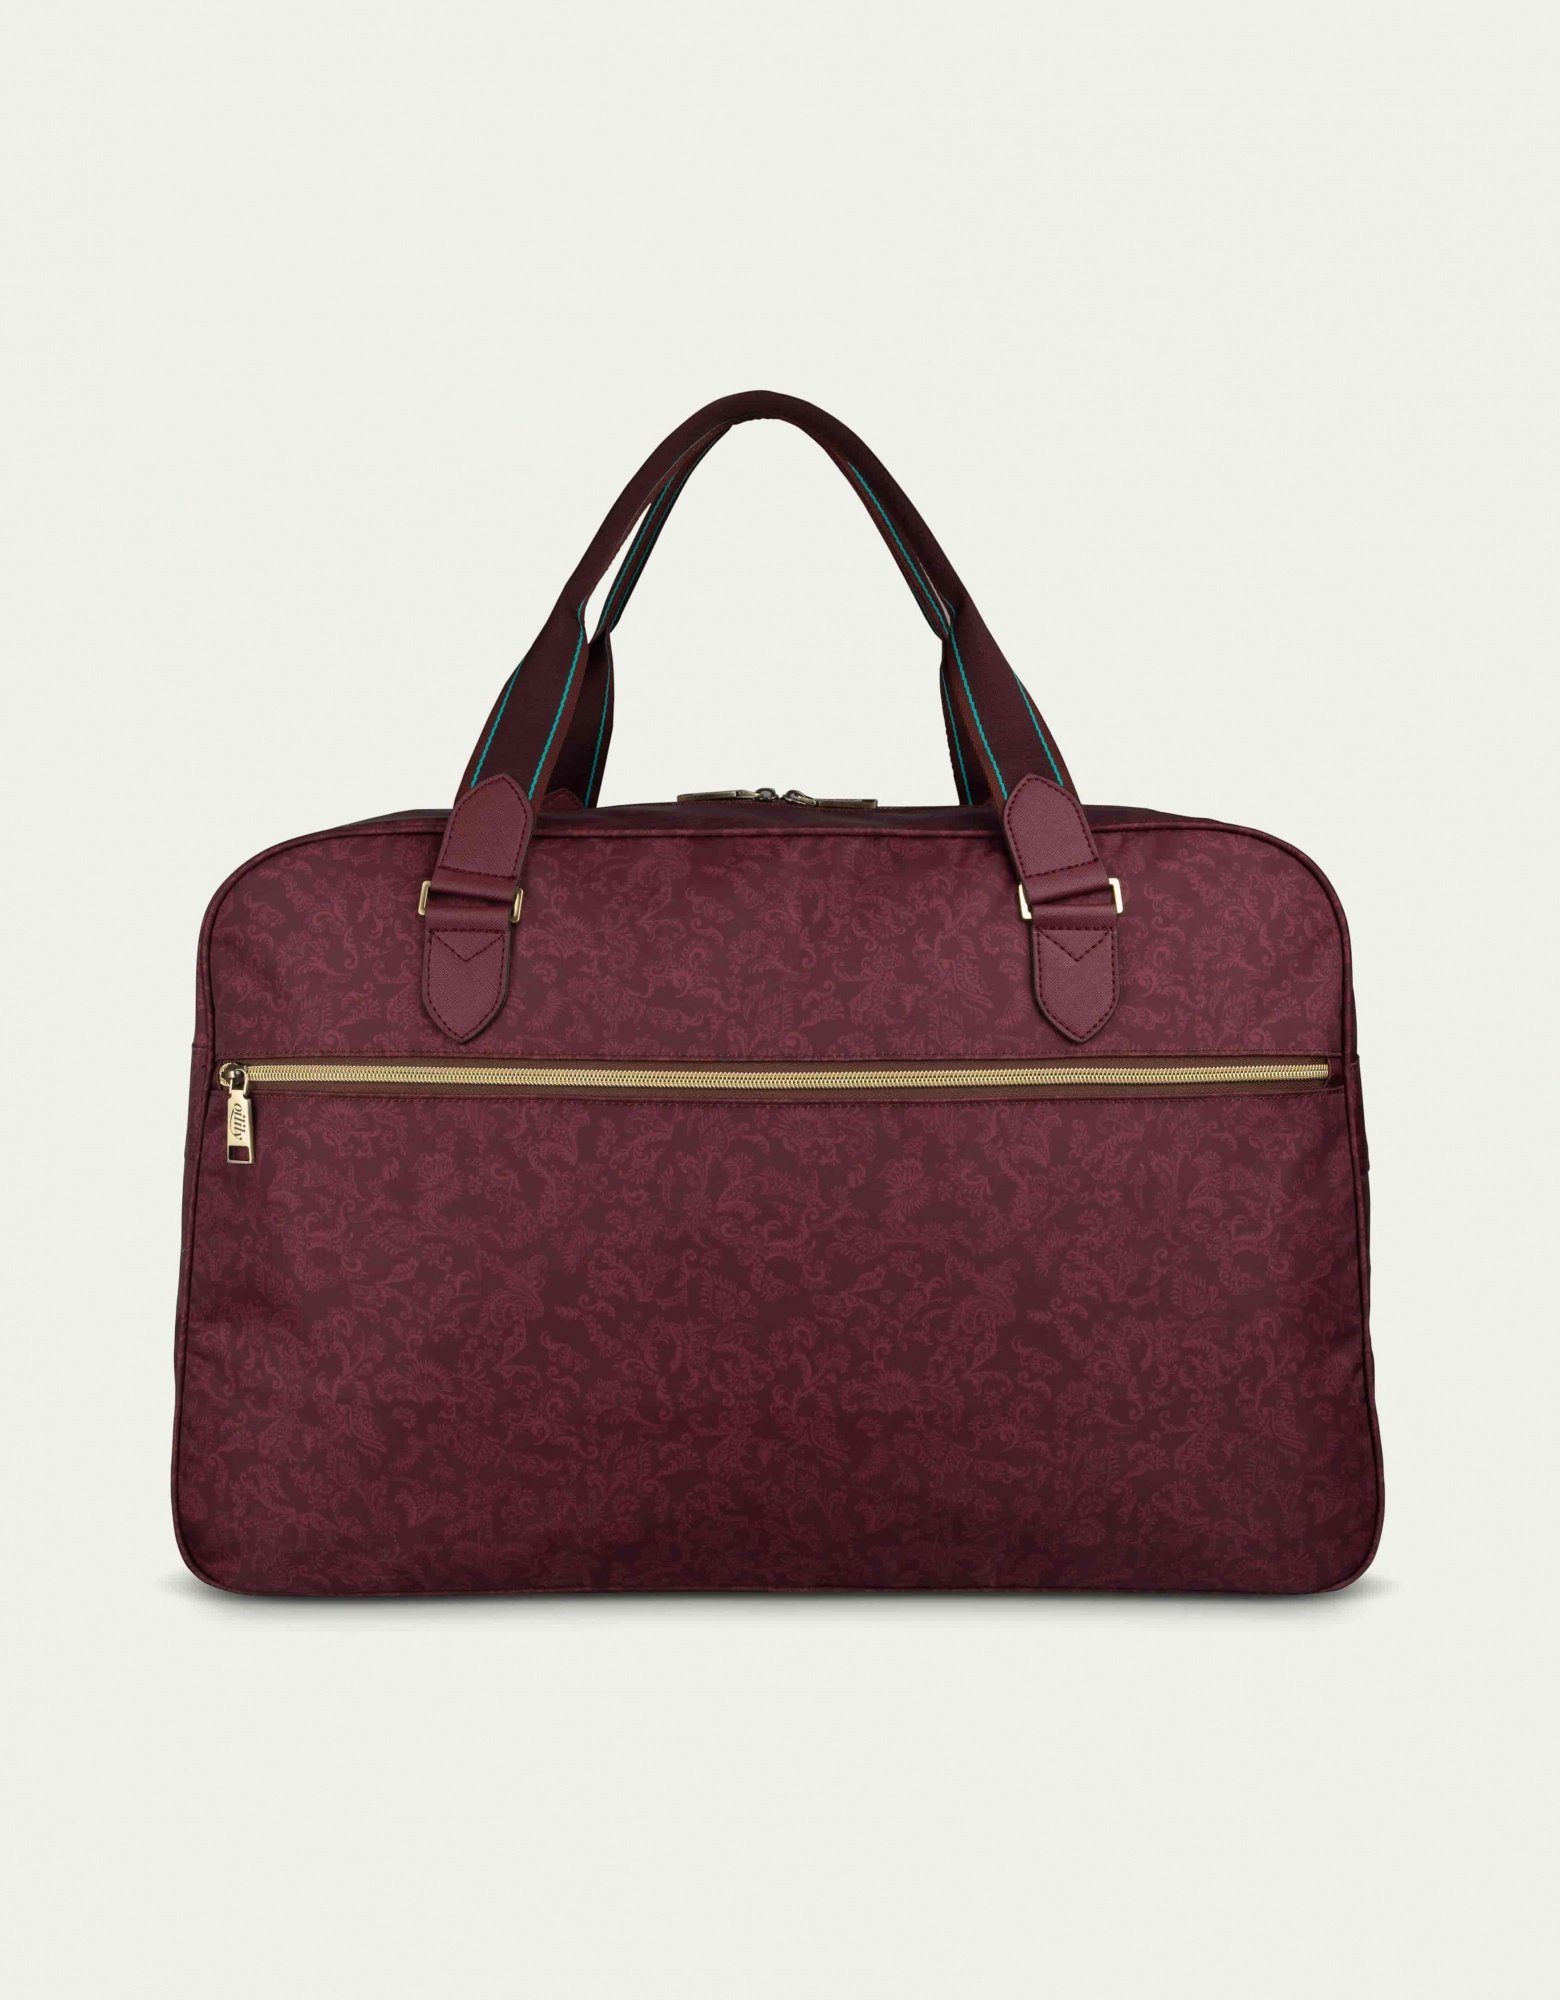 Weekender Mr Schultertasche Truffle Chocolate Oilily Paisley